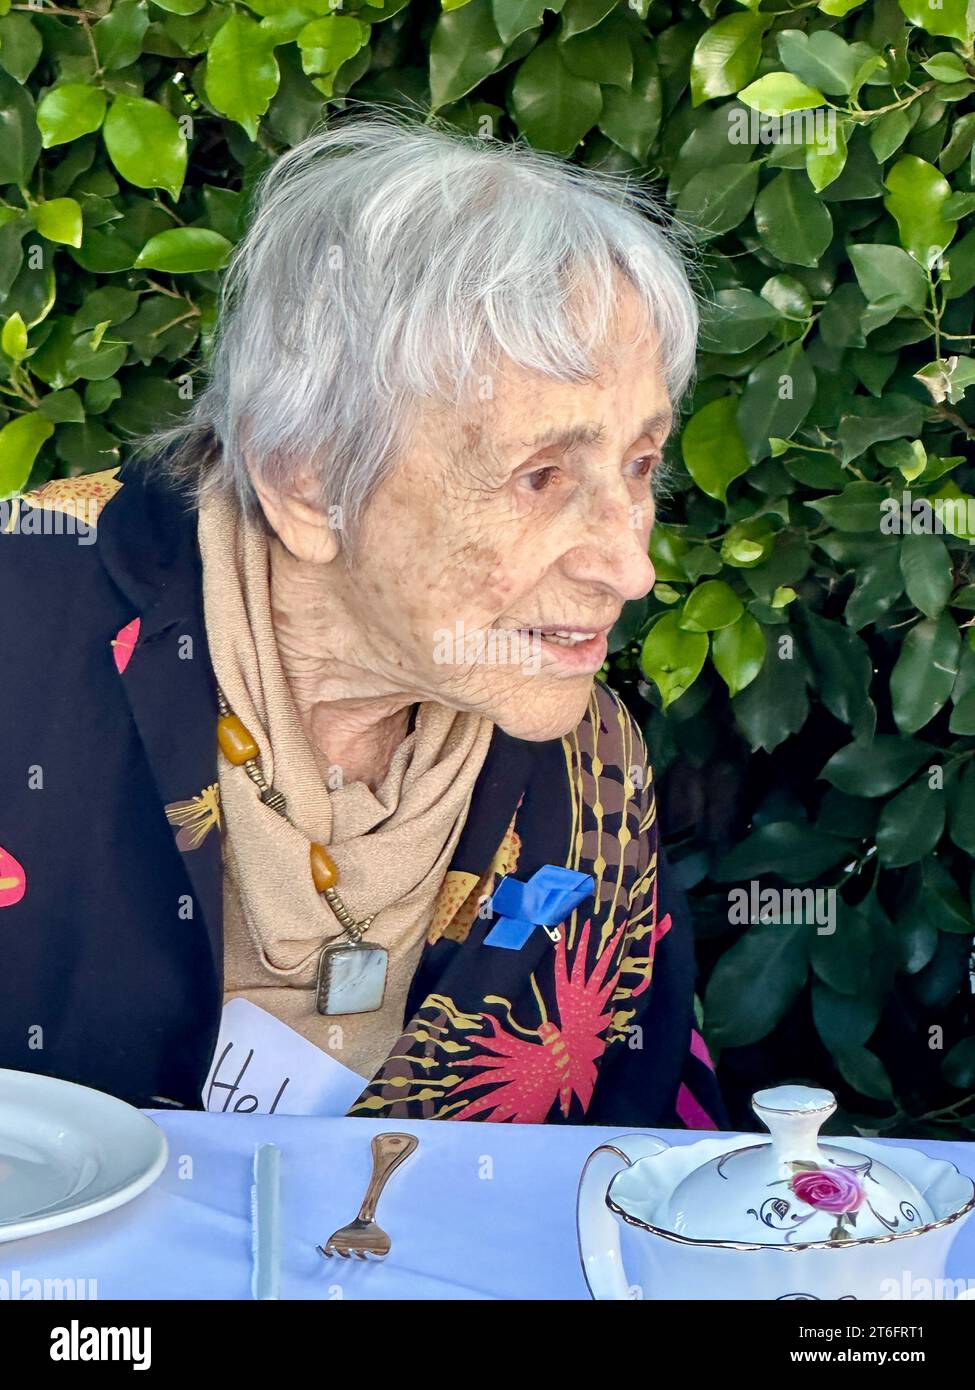 Santa Barbara, California, USA. 9th Nov, 2023. Helga Carden, Nazi Holocaust survivor:.November 9, 2023 is the 85th anniversary of Kristallnacht, (German for 'Night of Broken Glass'') when Nazis unleashed an orchestrated wave of violence against Jews in Germany and Austria to force them out of the country. More than one hundred Jews were murdered and thousands of Jewish institutions, synagogues, shops, and homes were ransacked and destroyed on Nov. 10th, 1938. The Jewish Federation of Greater Santa Barbara honored a group of local Holocaust survivors today by hosting a luncheon at the Stock Photo